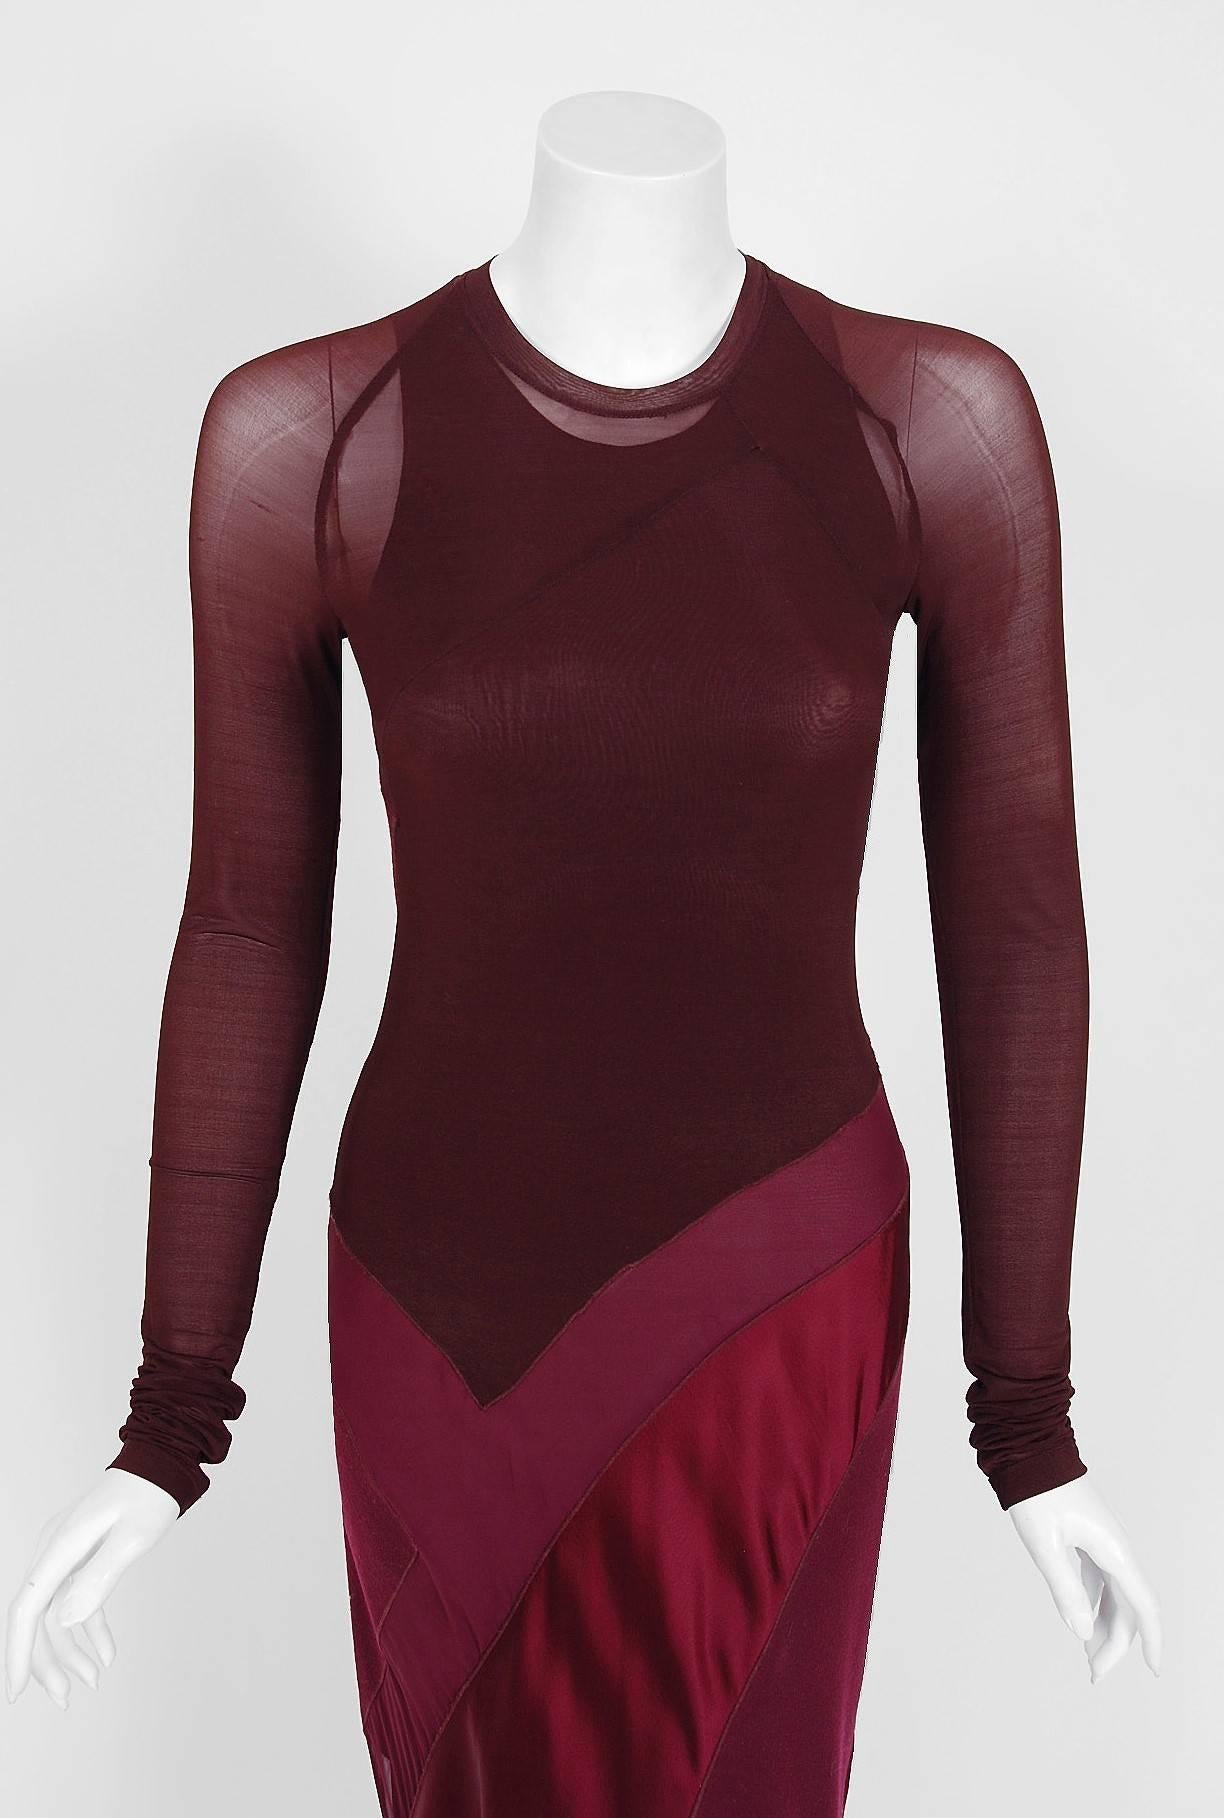 Donna Karan is a one-woman powerhouse who has made uptown dressing her signature. Her aim when she started out in 1985 was to dress women in comfort, liberating them from the confines of Eighties power suits. This vibrant maroon dress is a wonderful